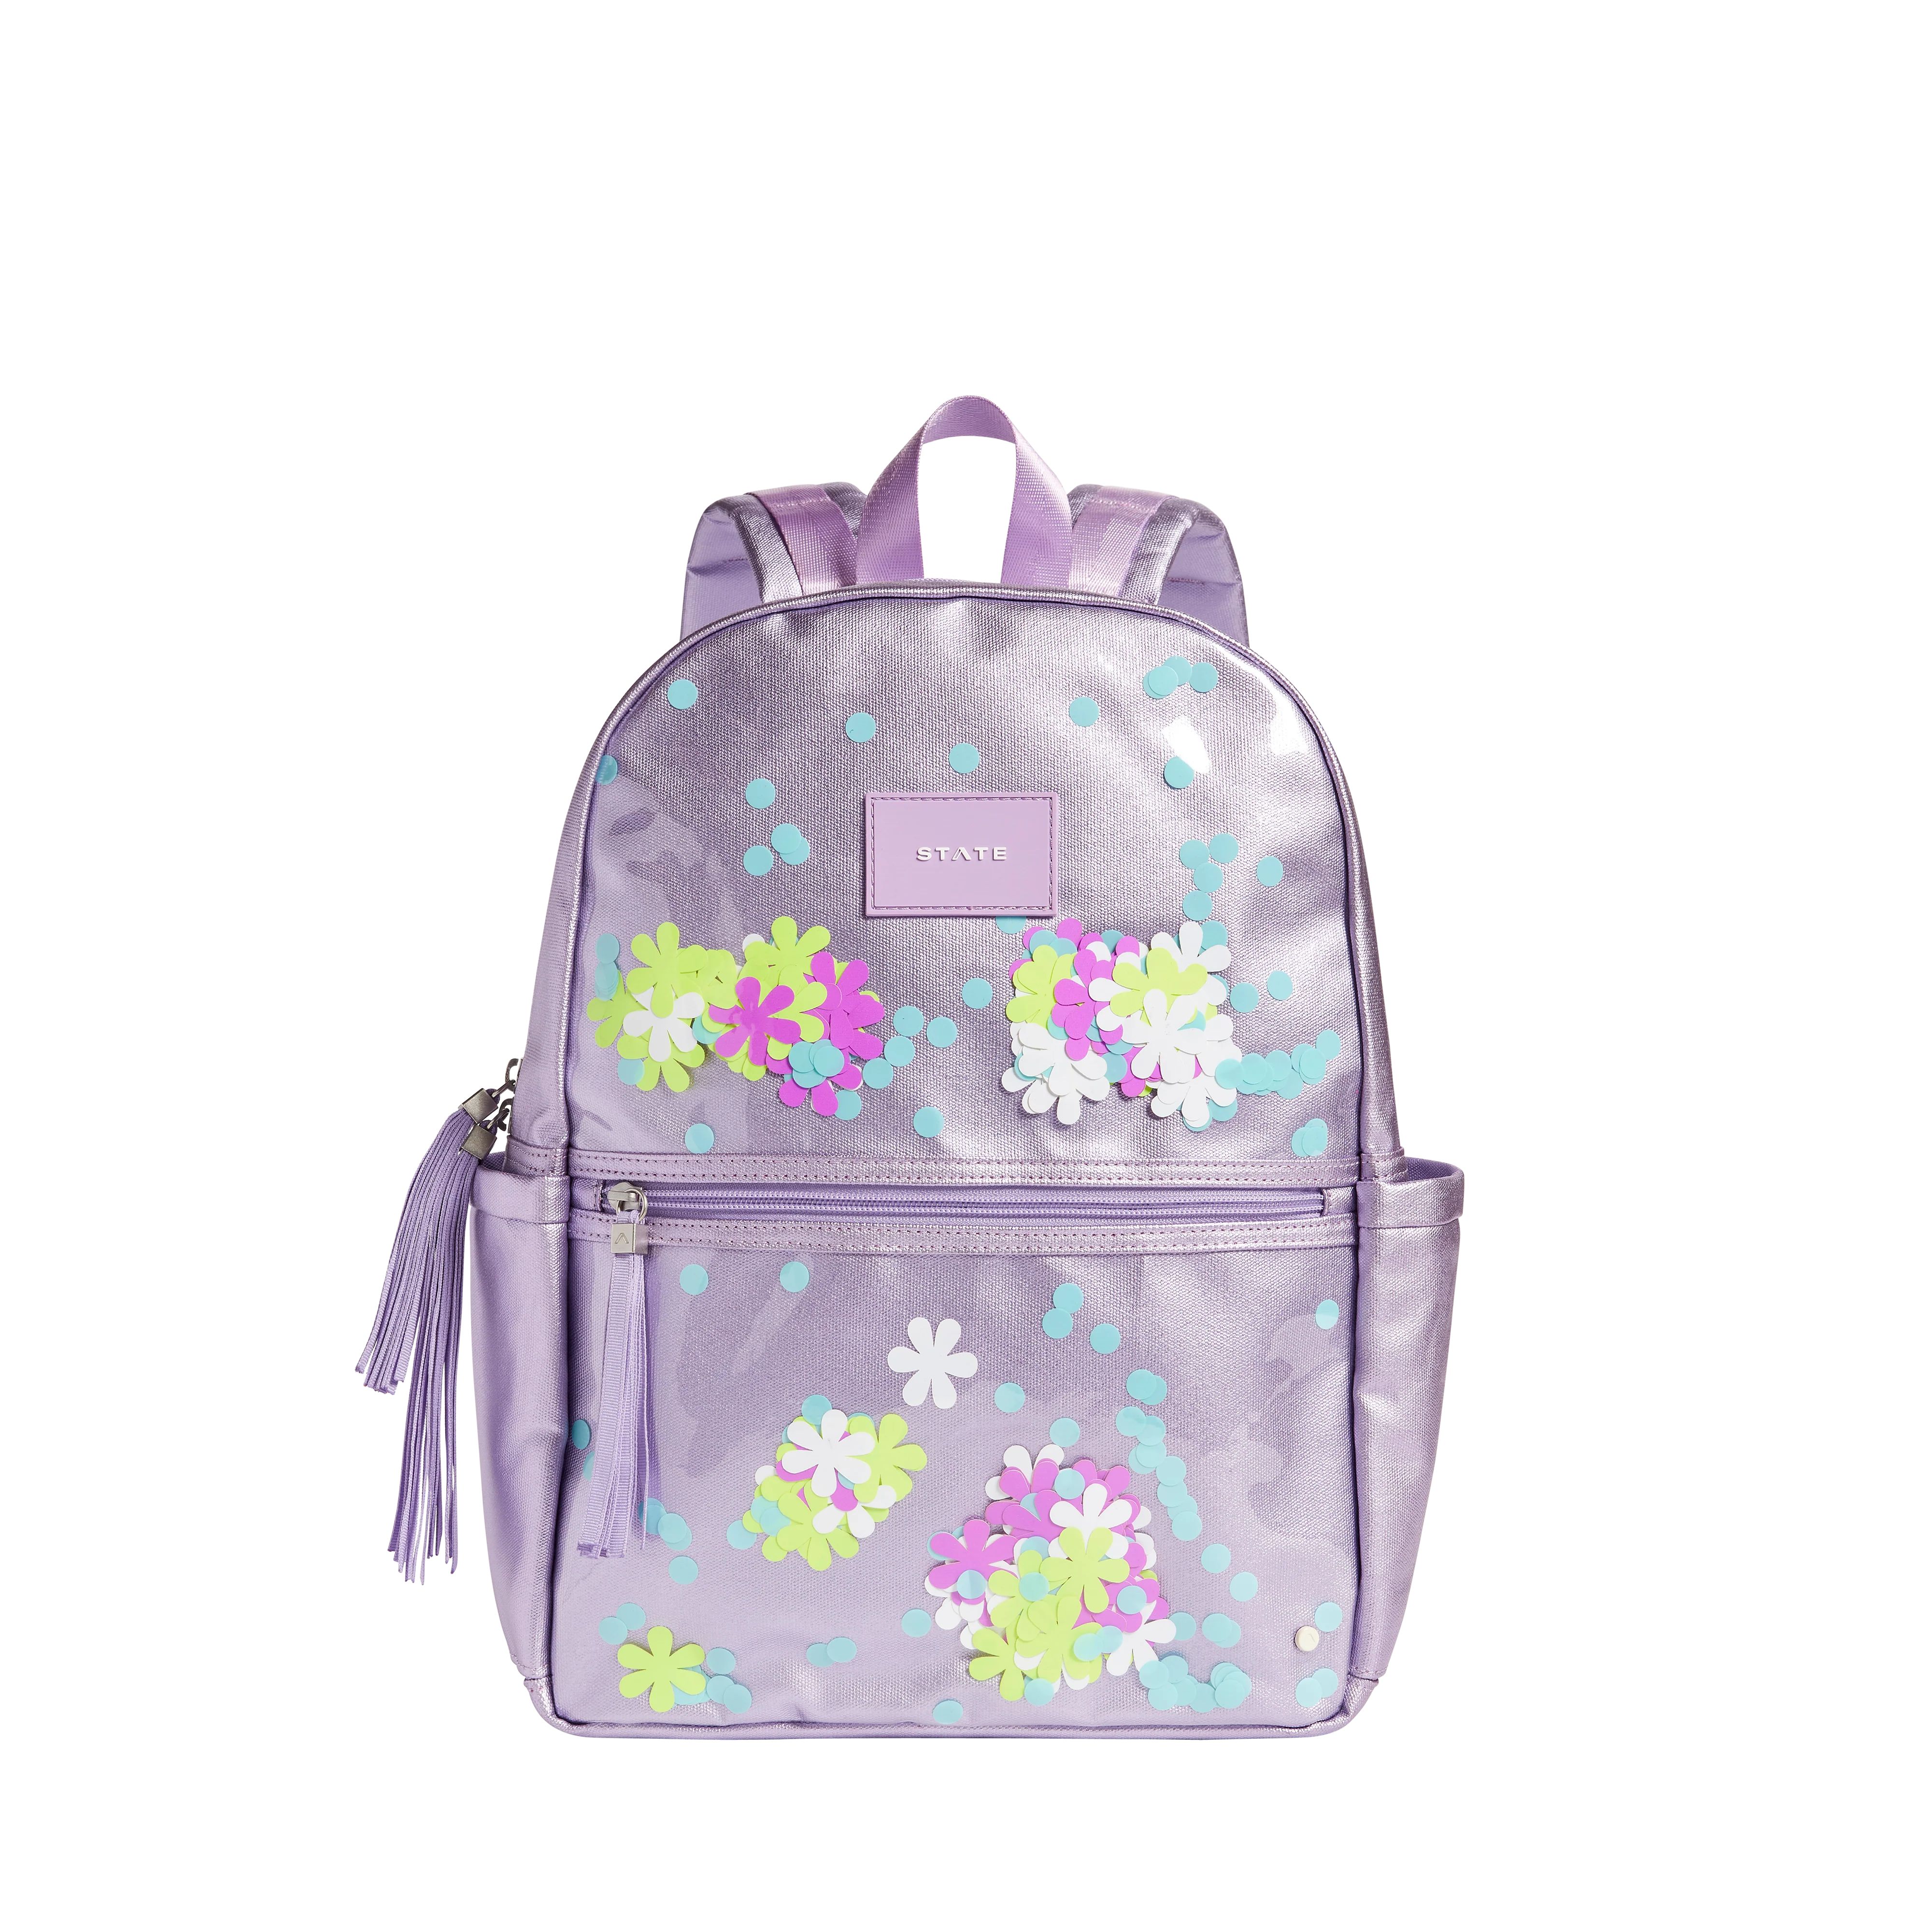 STATE Bags | Kane Kids Backpack Metallic Daisy Sequins | STATE Bags